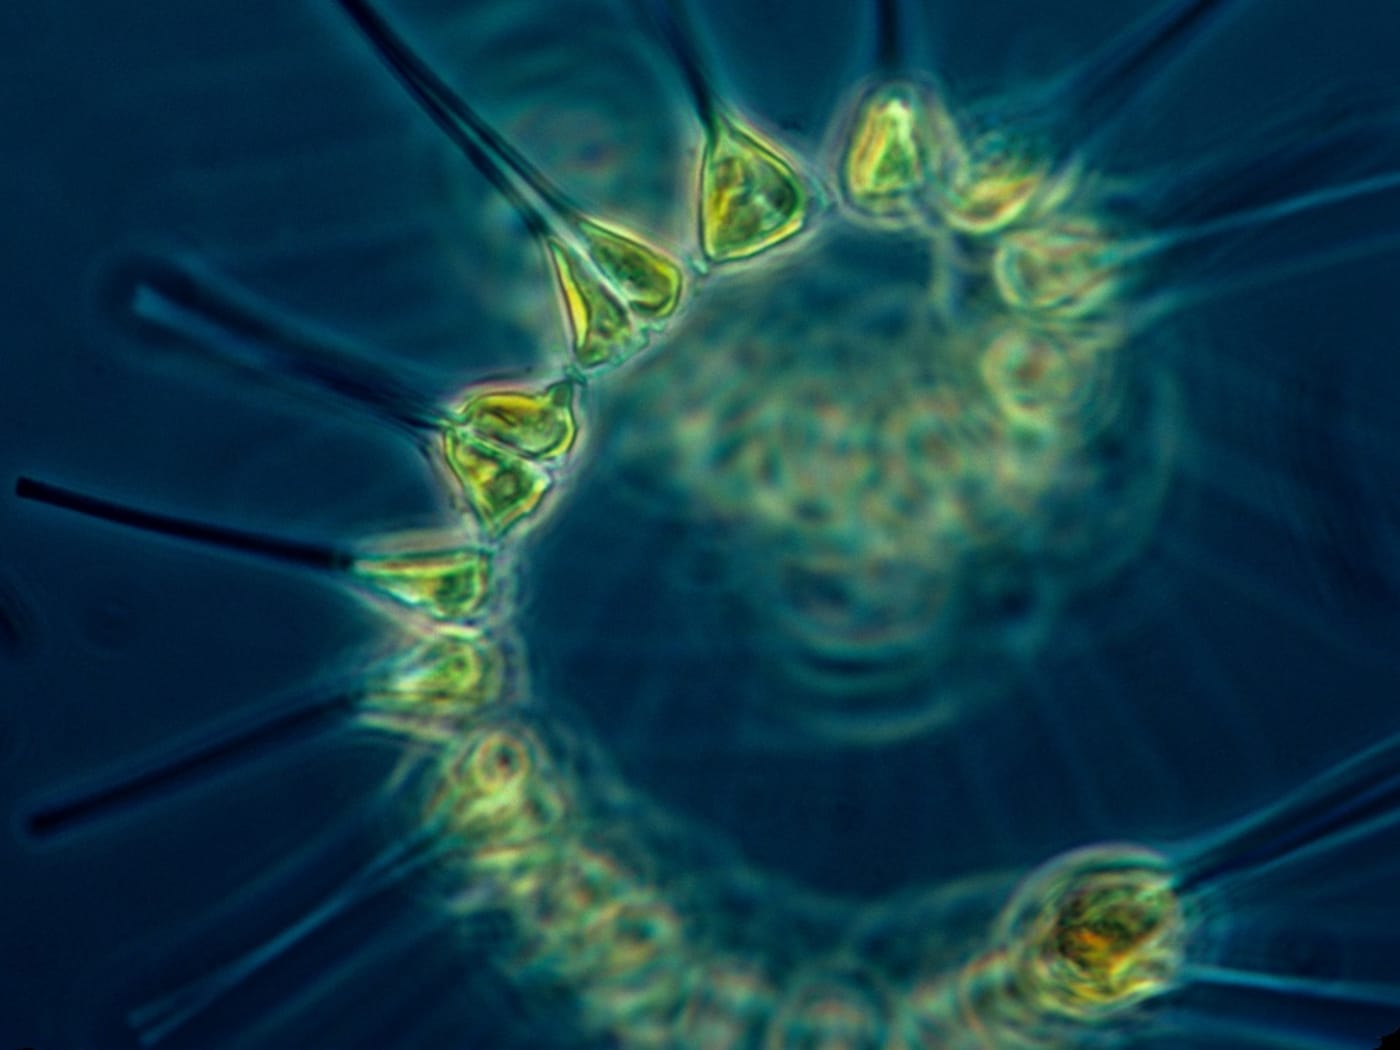 Phytoplankton the foundation of the oceanic food chain